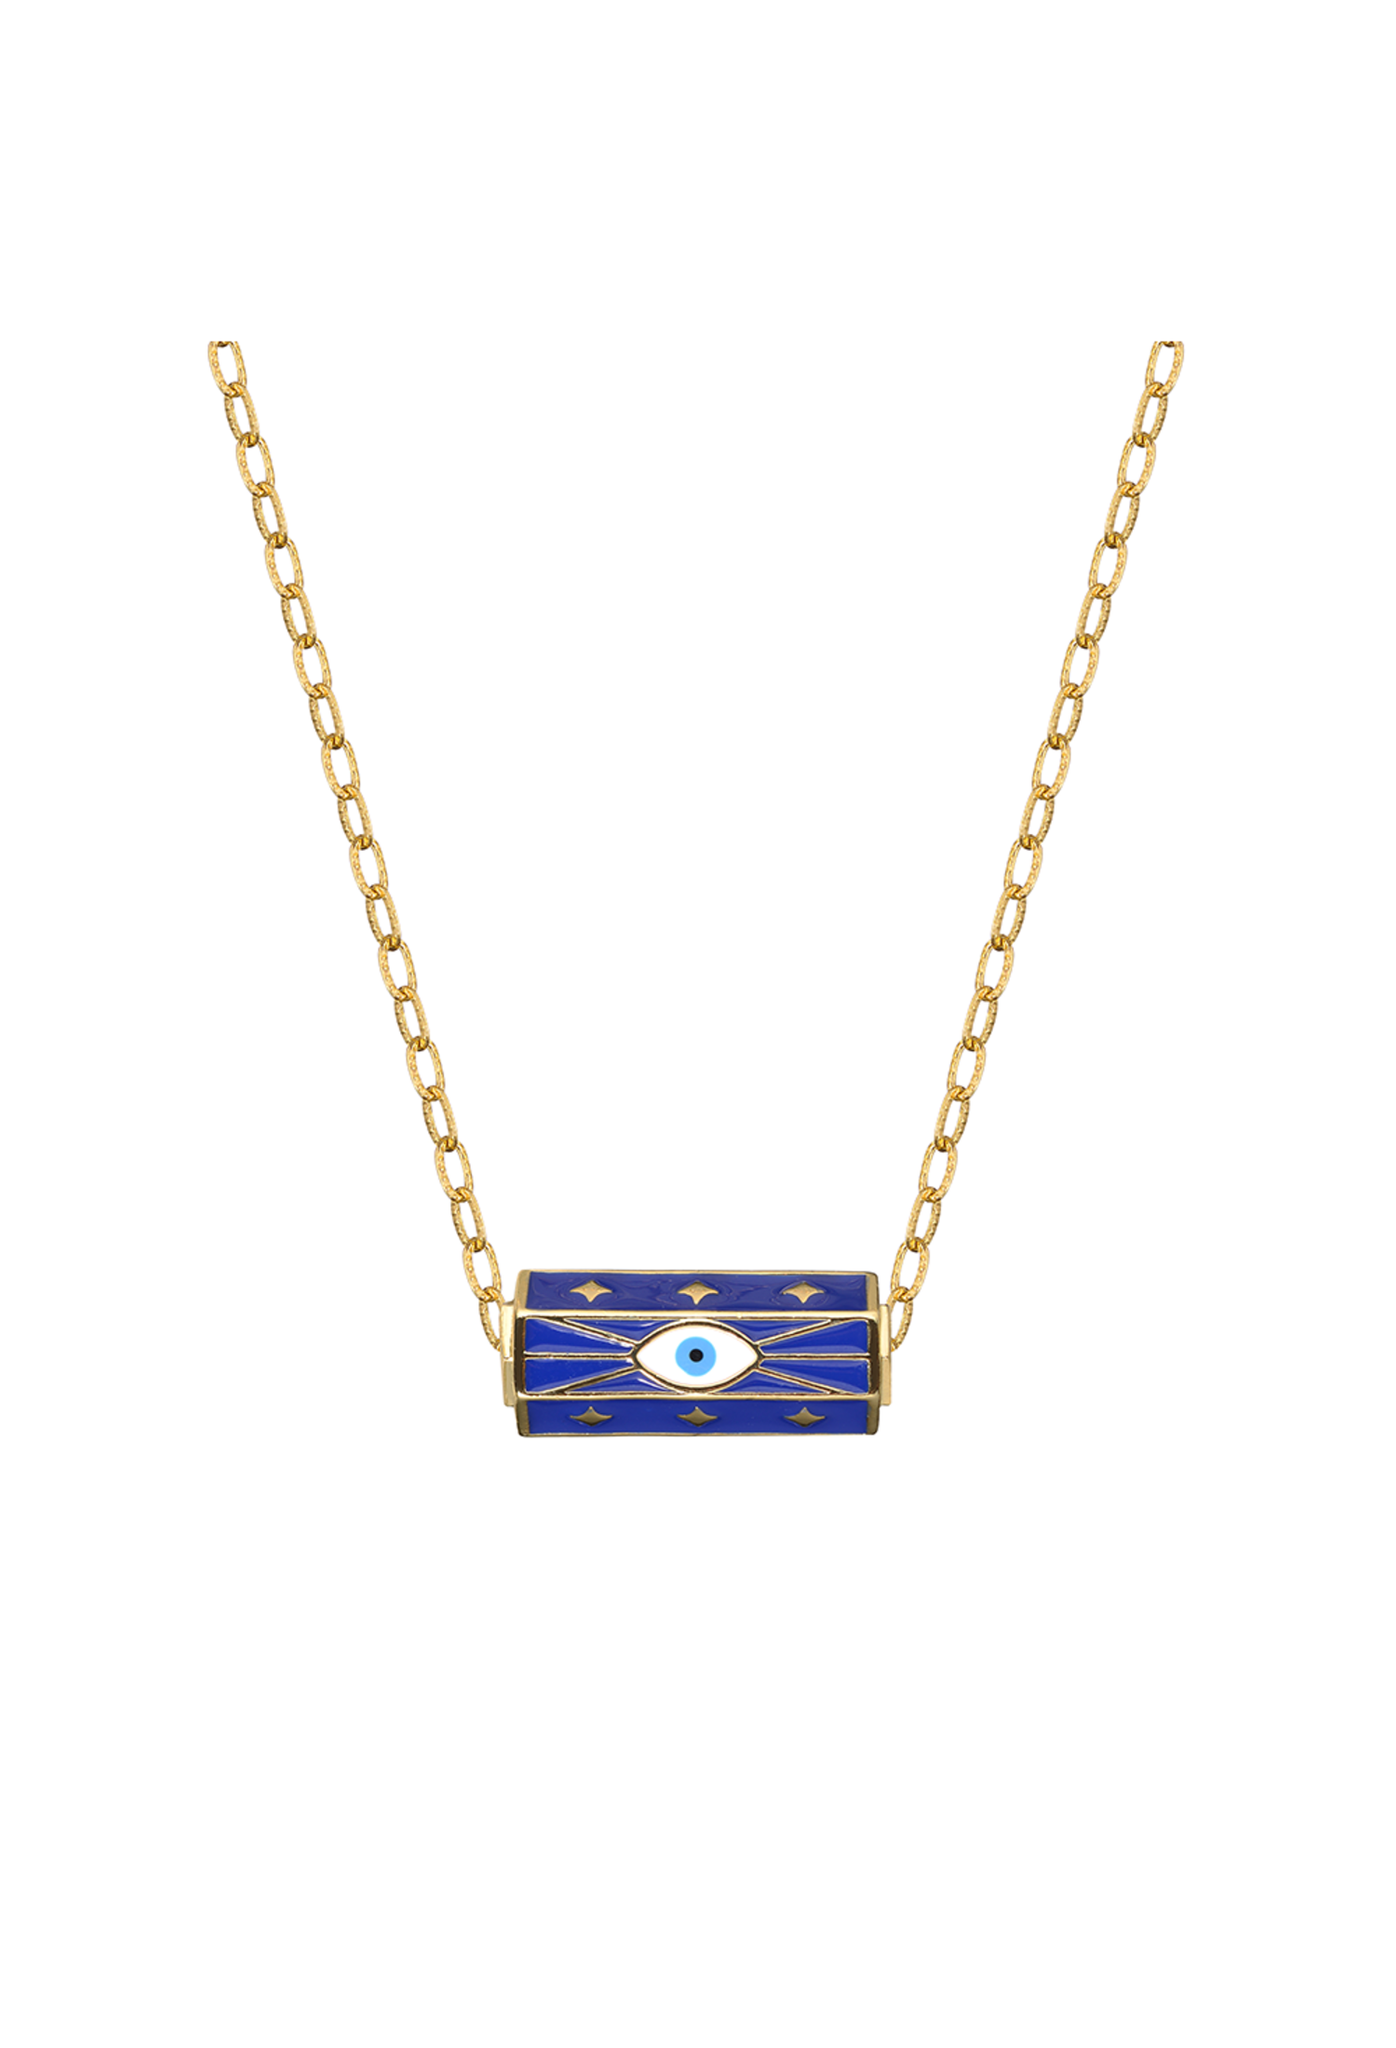 Gold Chain with Blue Eye Pendant